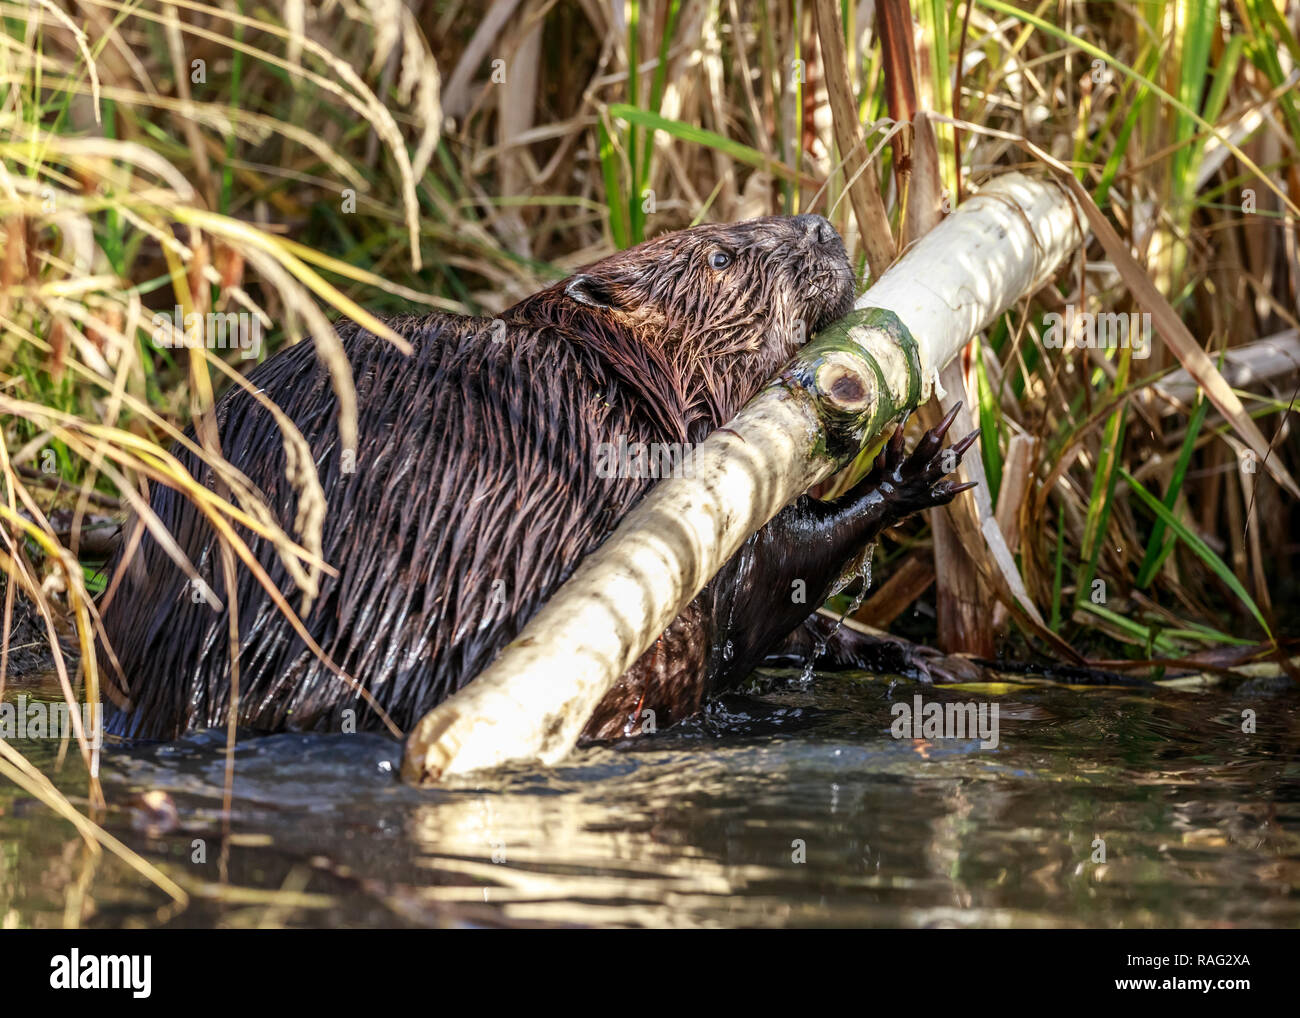 Beaver chewing on log, Riding Mountain National Park, Manitoba, Canada. Stock Photo